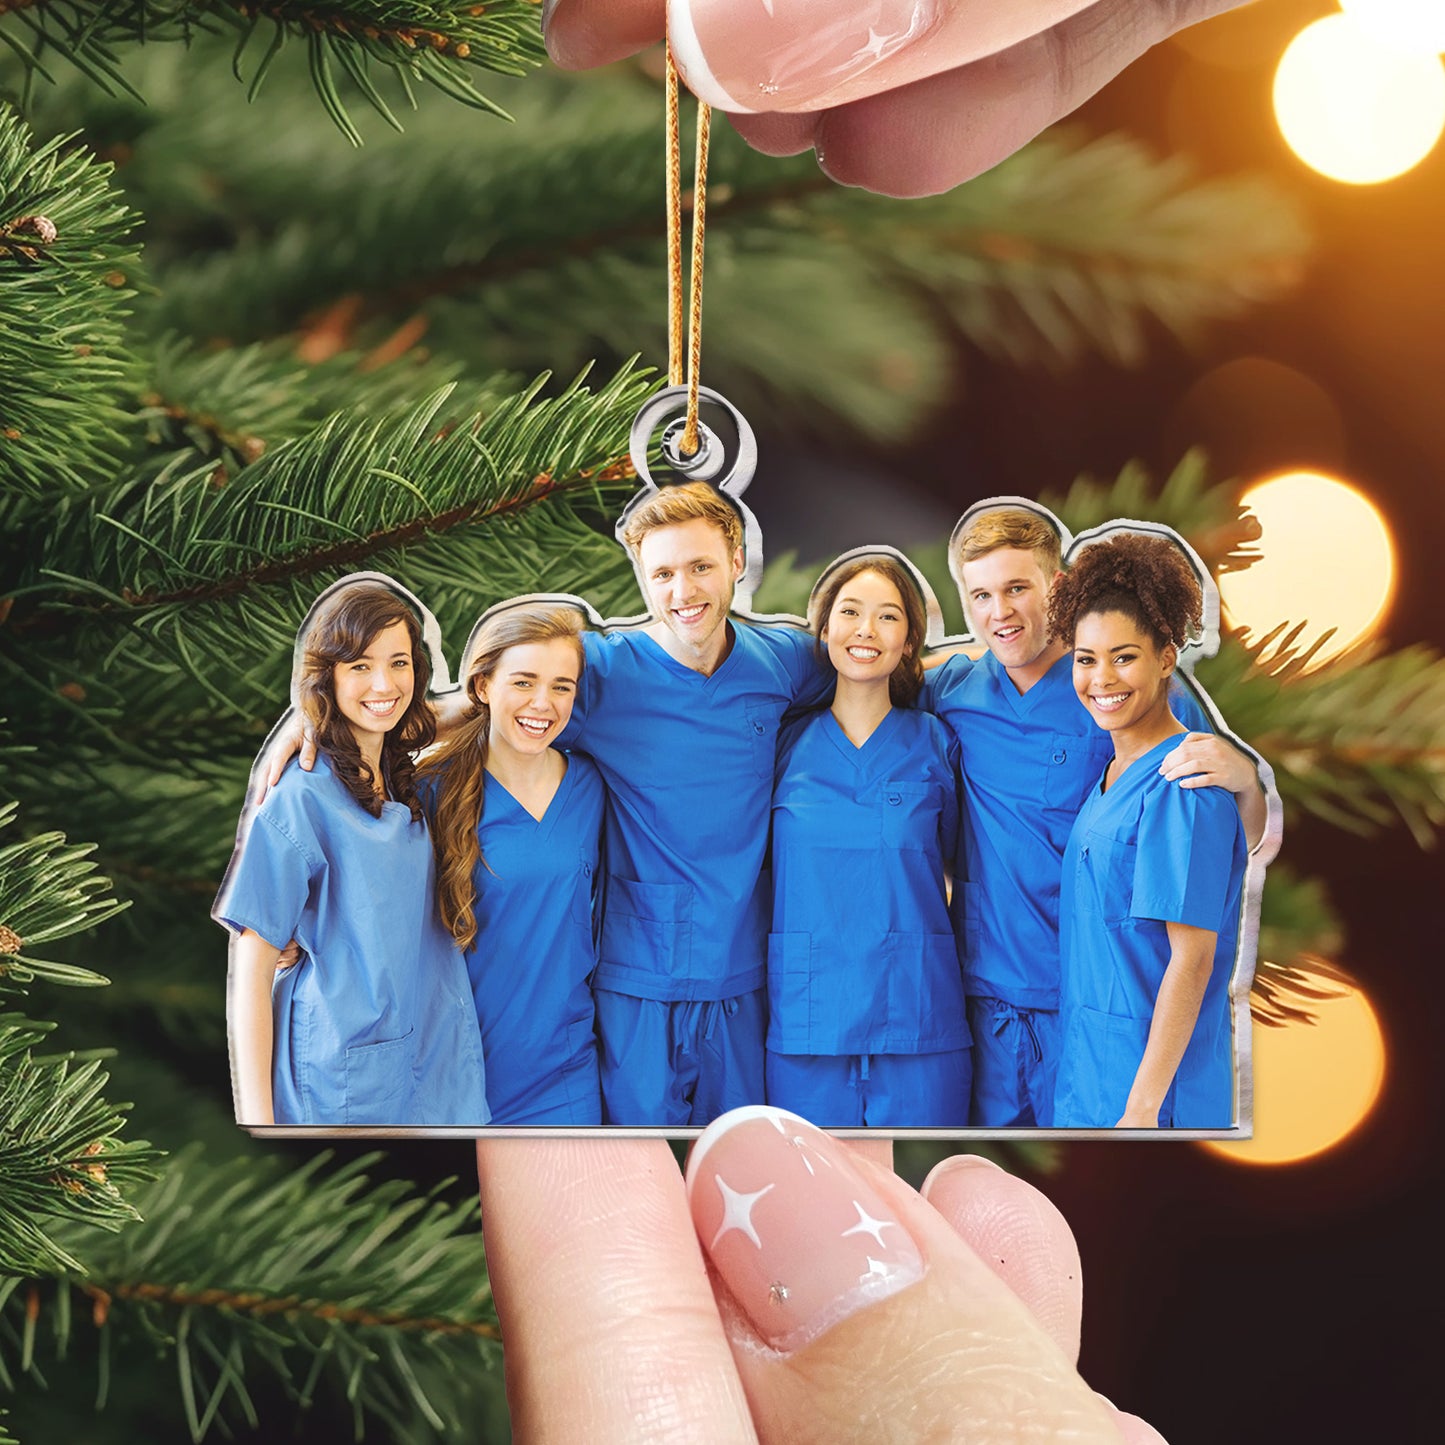 Christmas Gift For Nurse Besties - Personalized Acrylic Photo Ornament